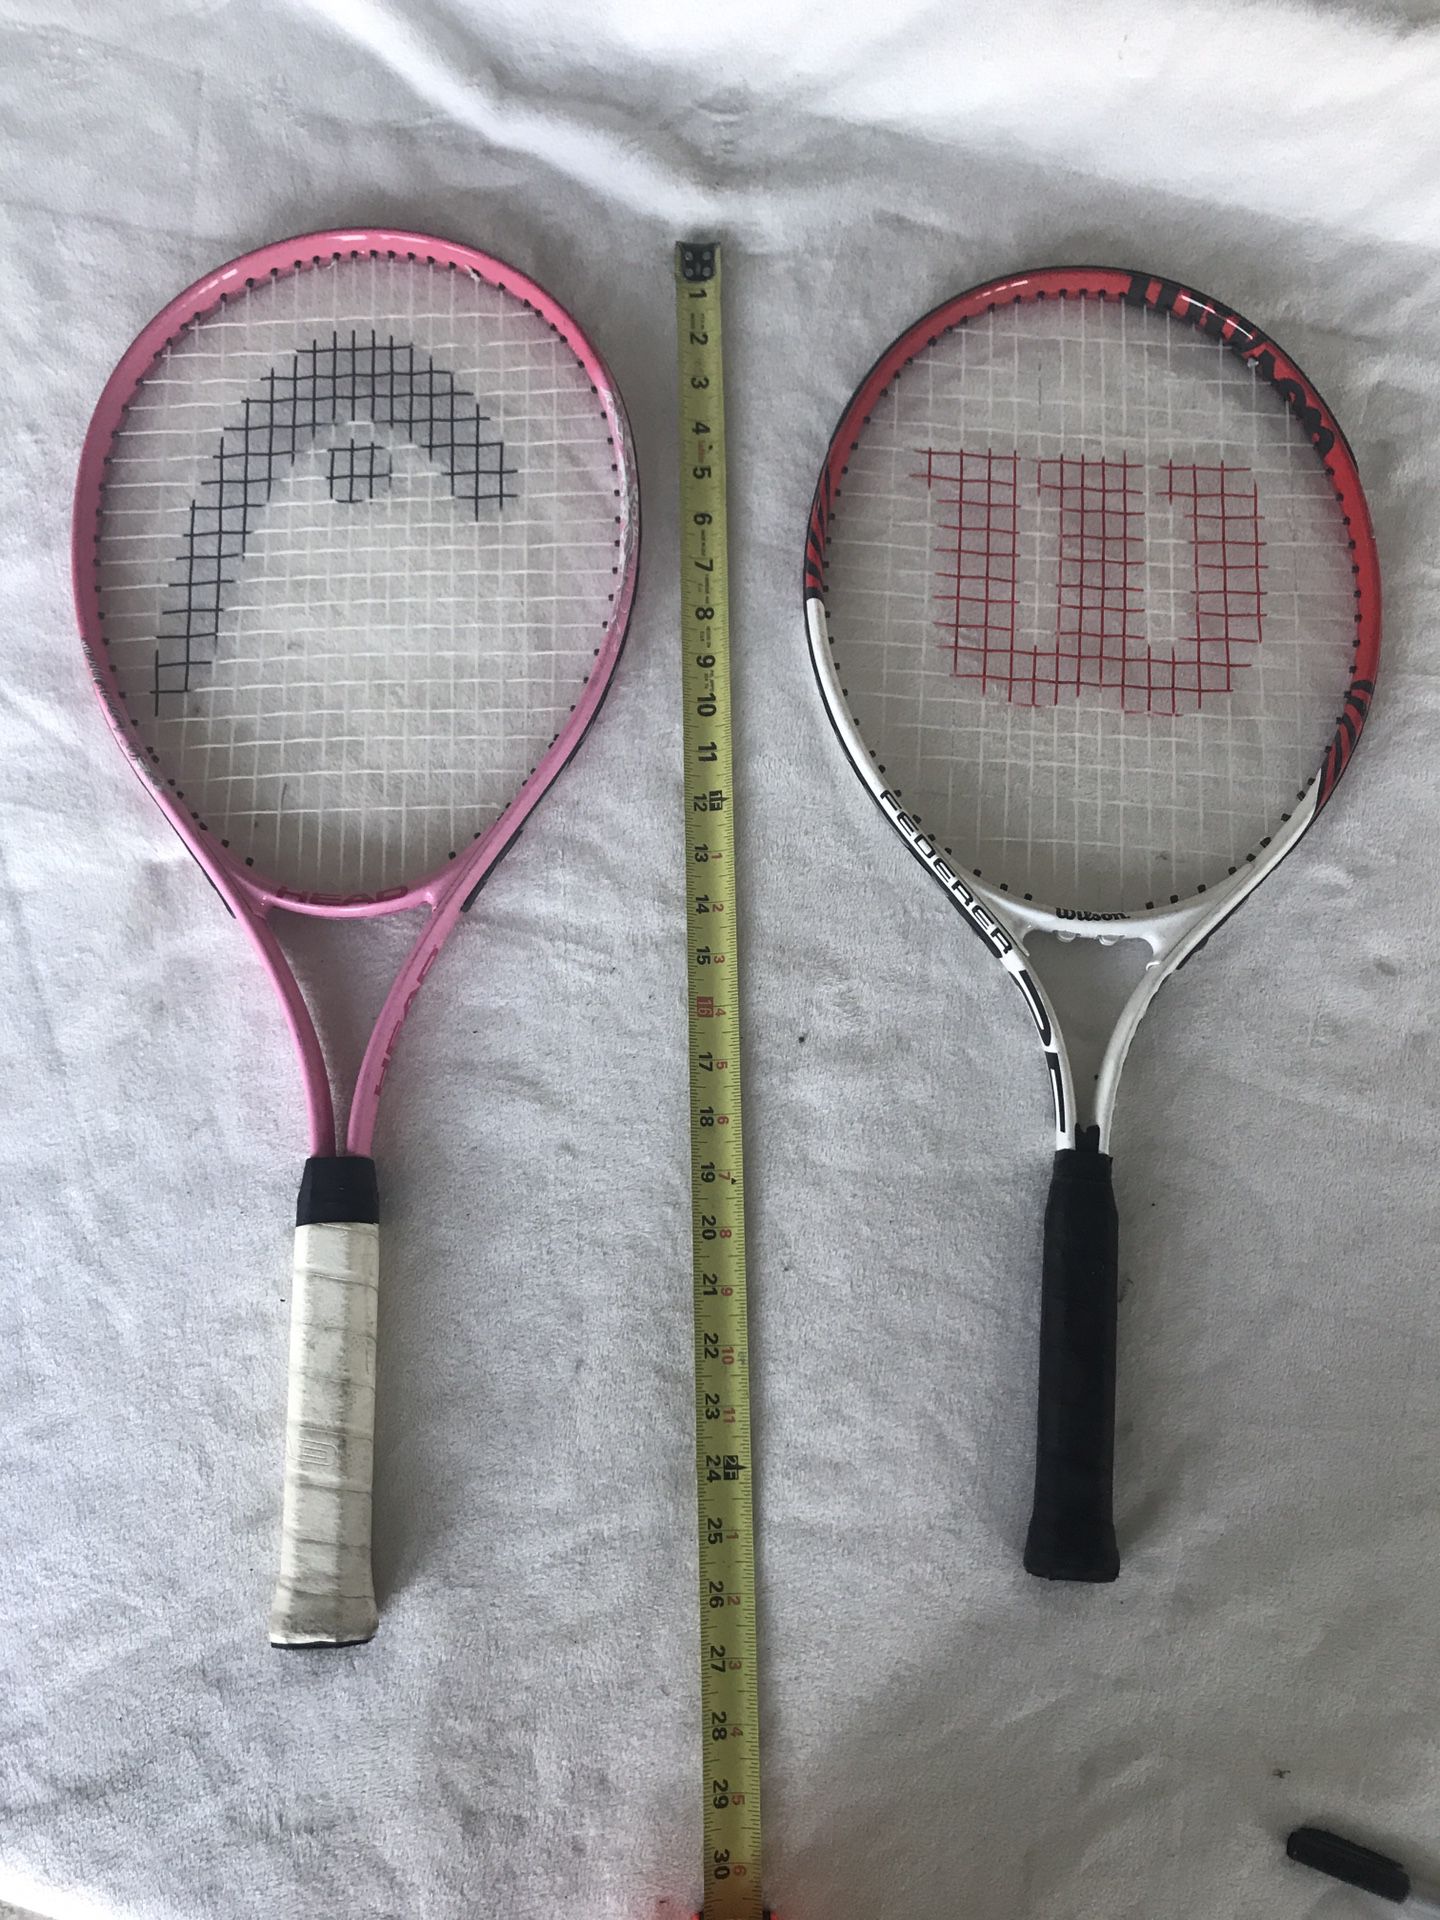 Tennis rackets Head Radical and Wilson Federer 25 pro rackets $35 for both